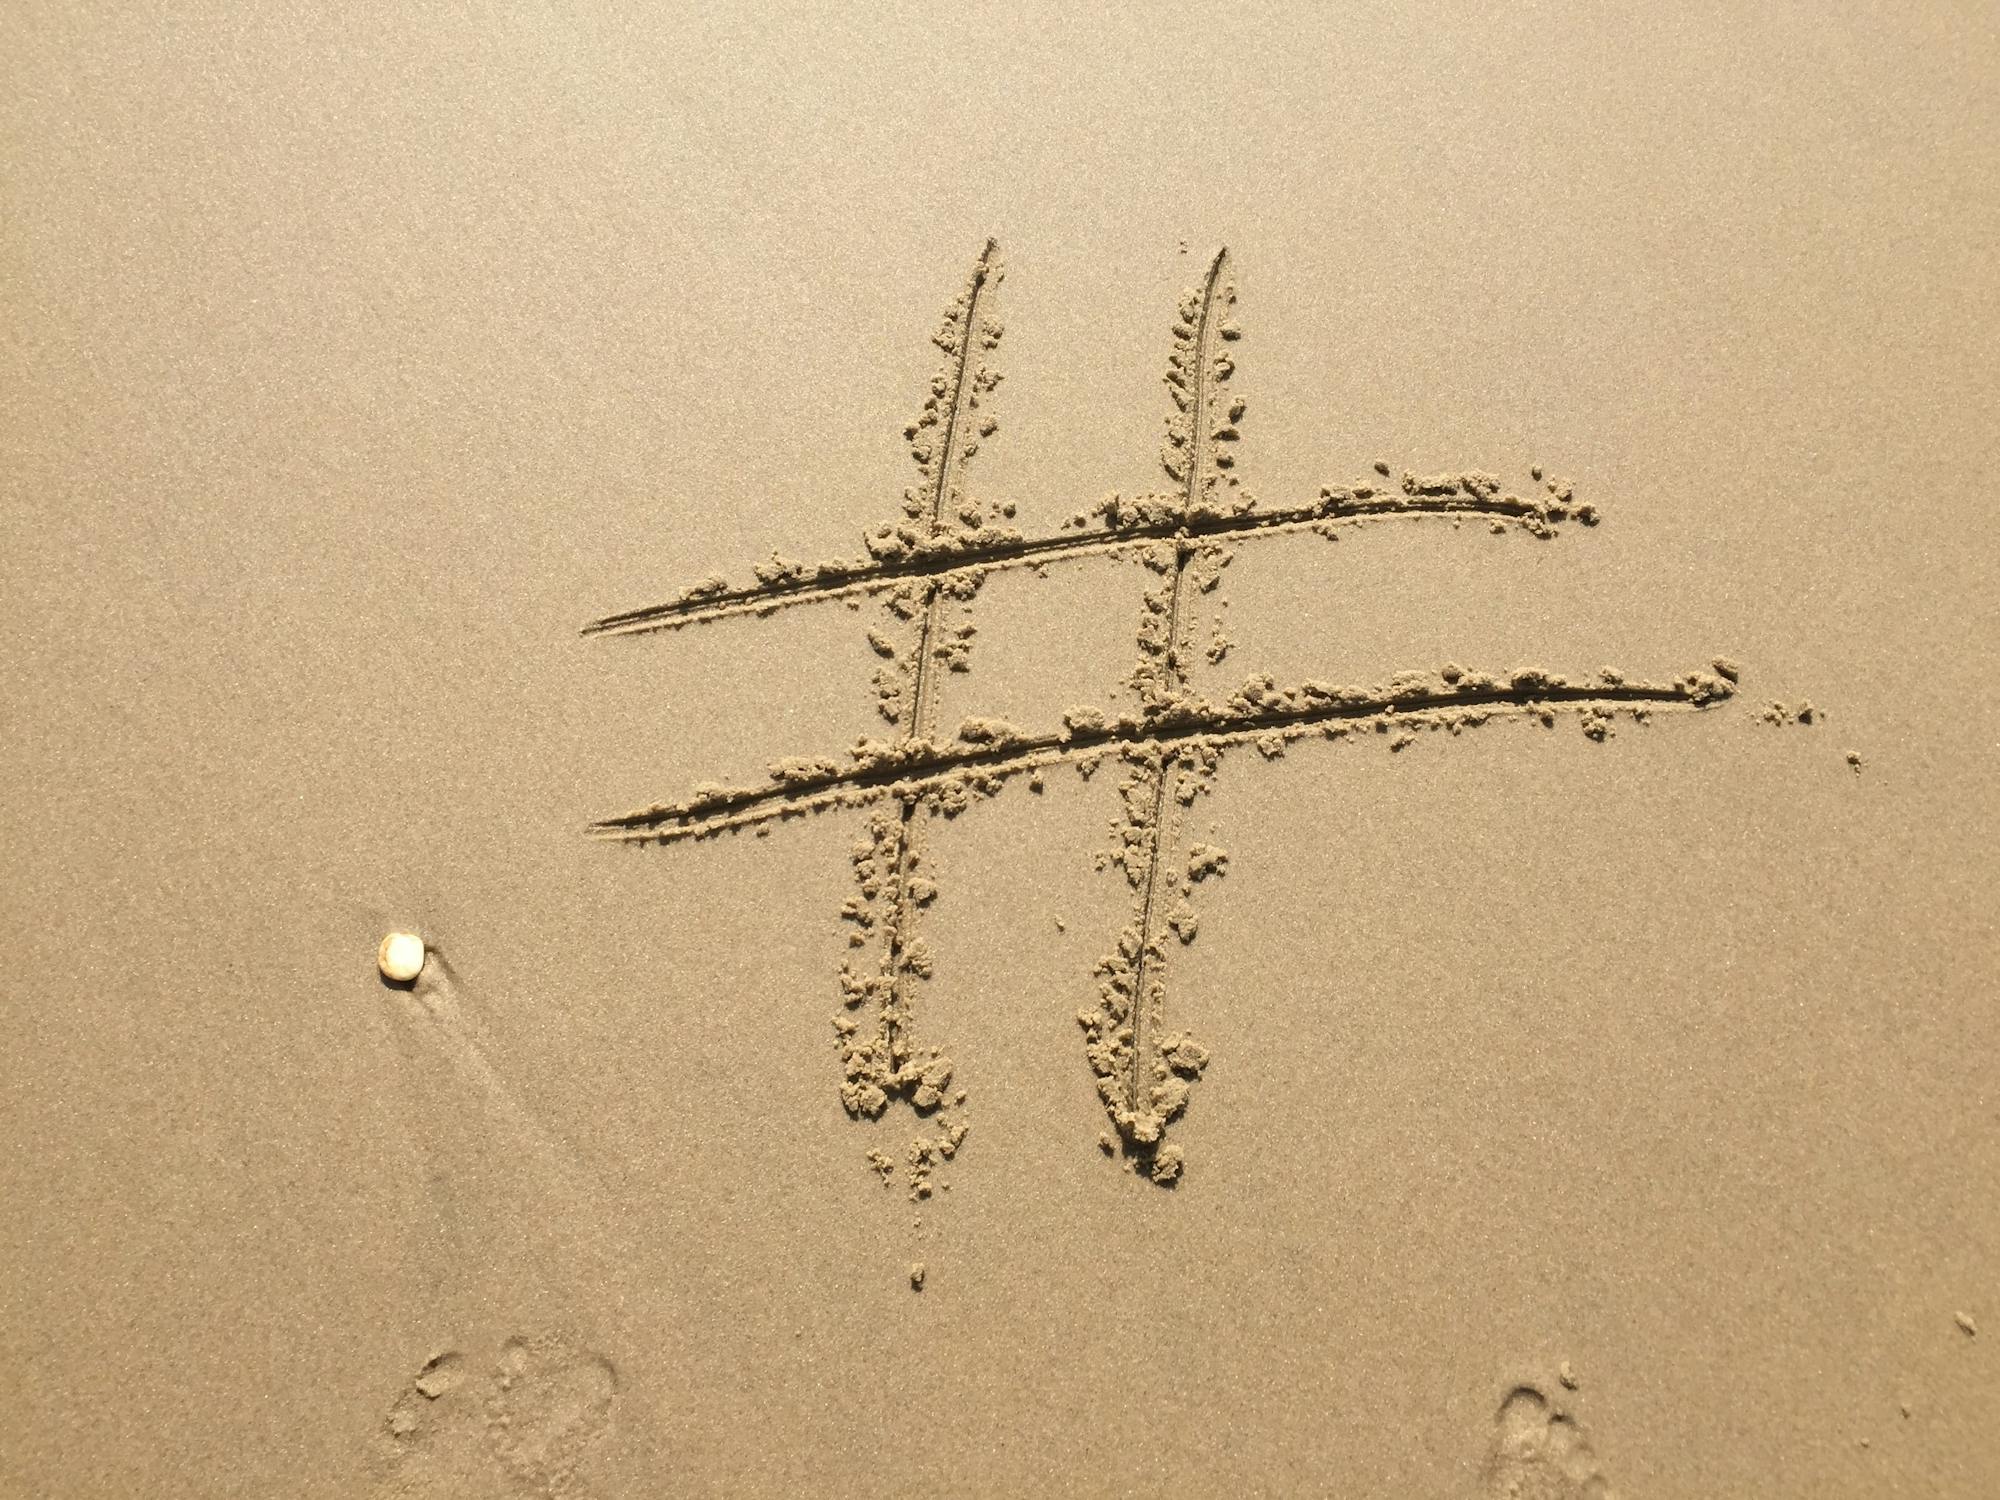 Use hashtags to drive traffic to your Instagram posts to promote your Kindle book.